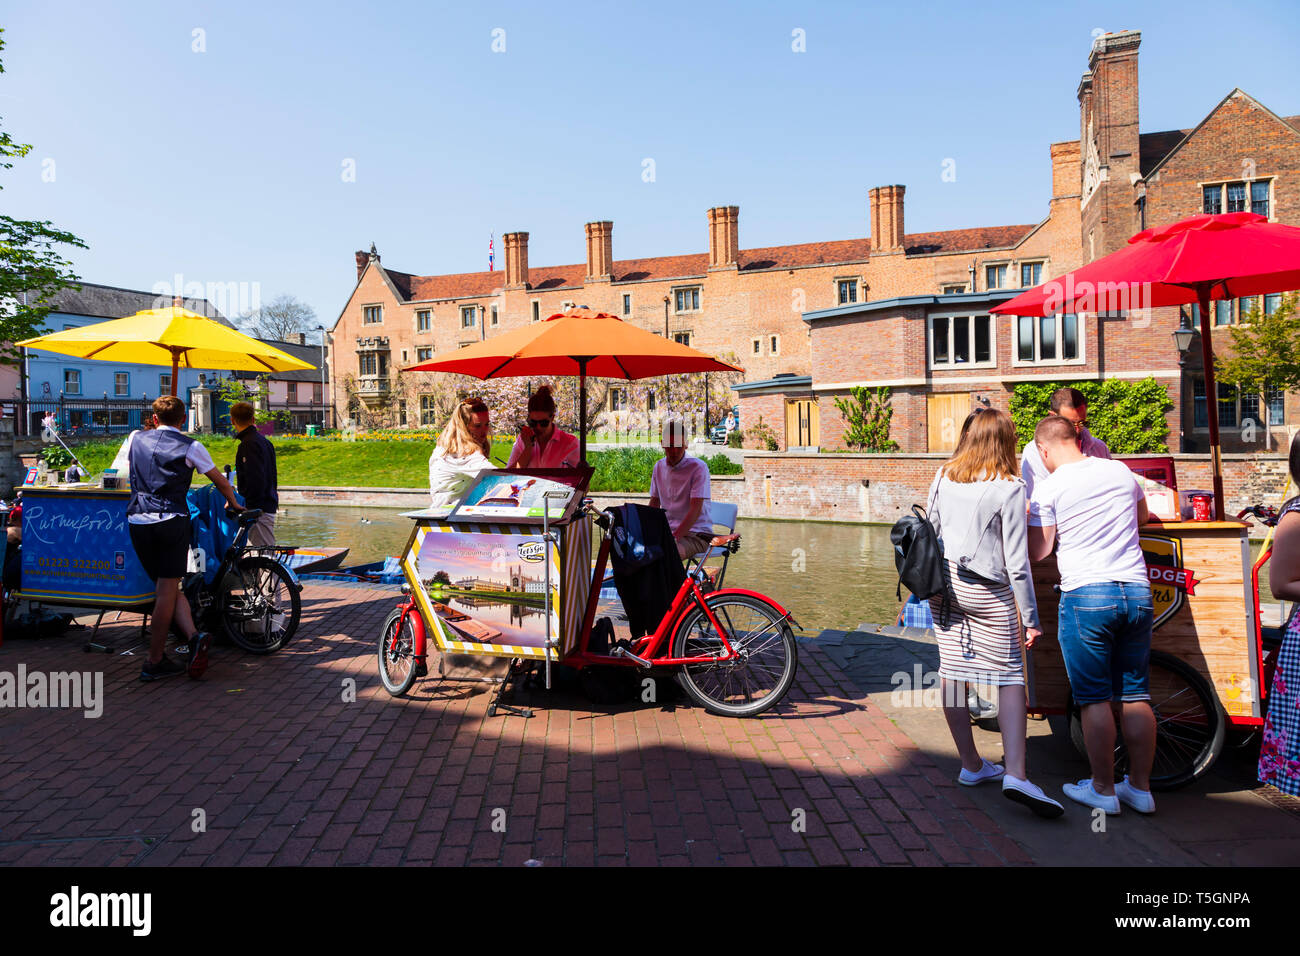 Stalls selling tickets for punting at the quayside, River Cam. Magdalene college is in the background.University town of Cambridge, Cambridgeshire, Stock Photo